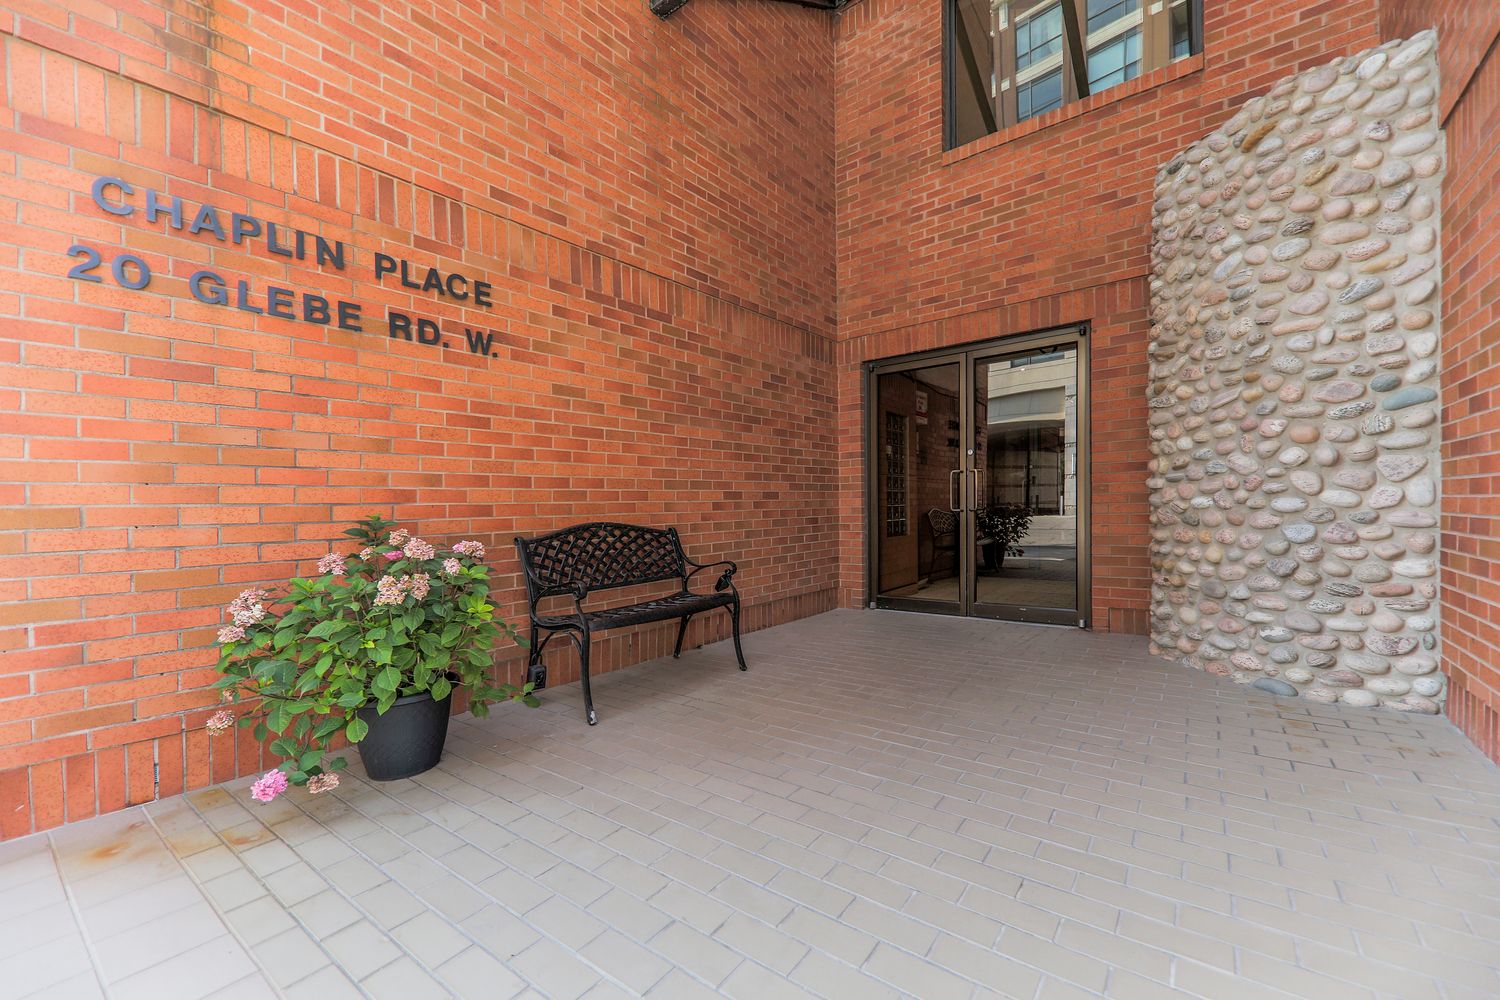 20 Glebe Road W. Chaplin Place is located in  Midtown, Toronto - image #4 of 4